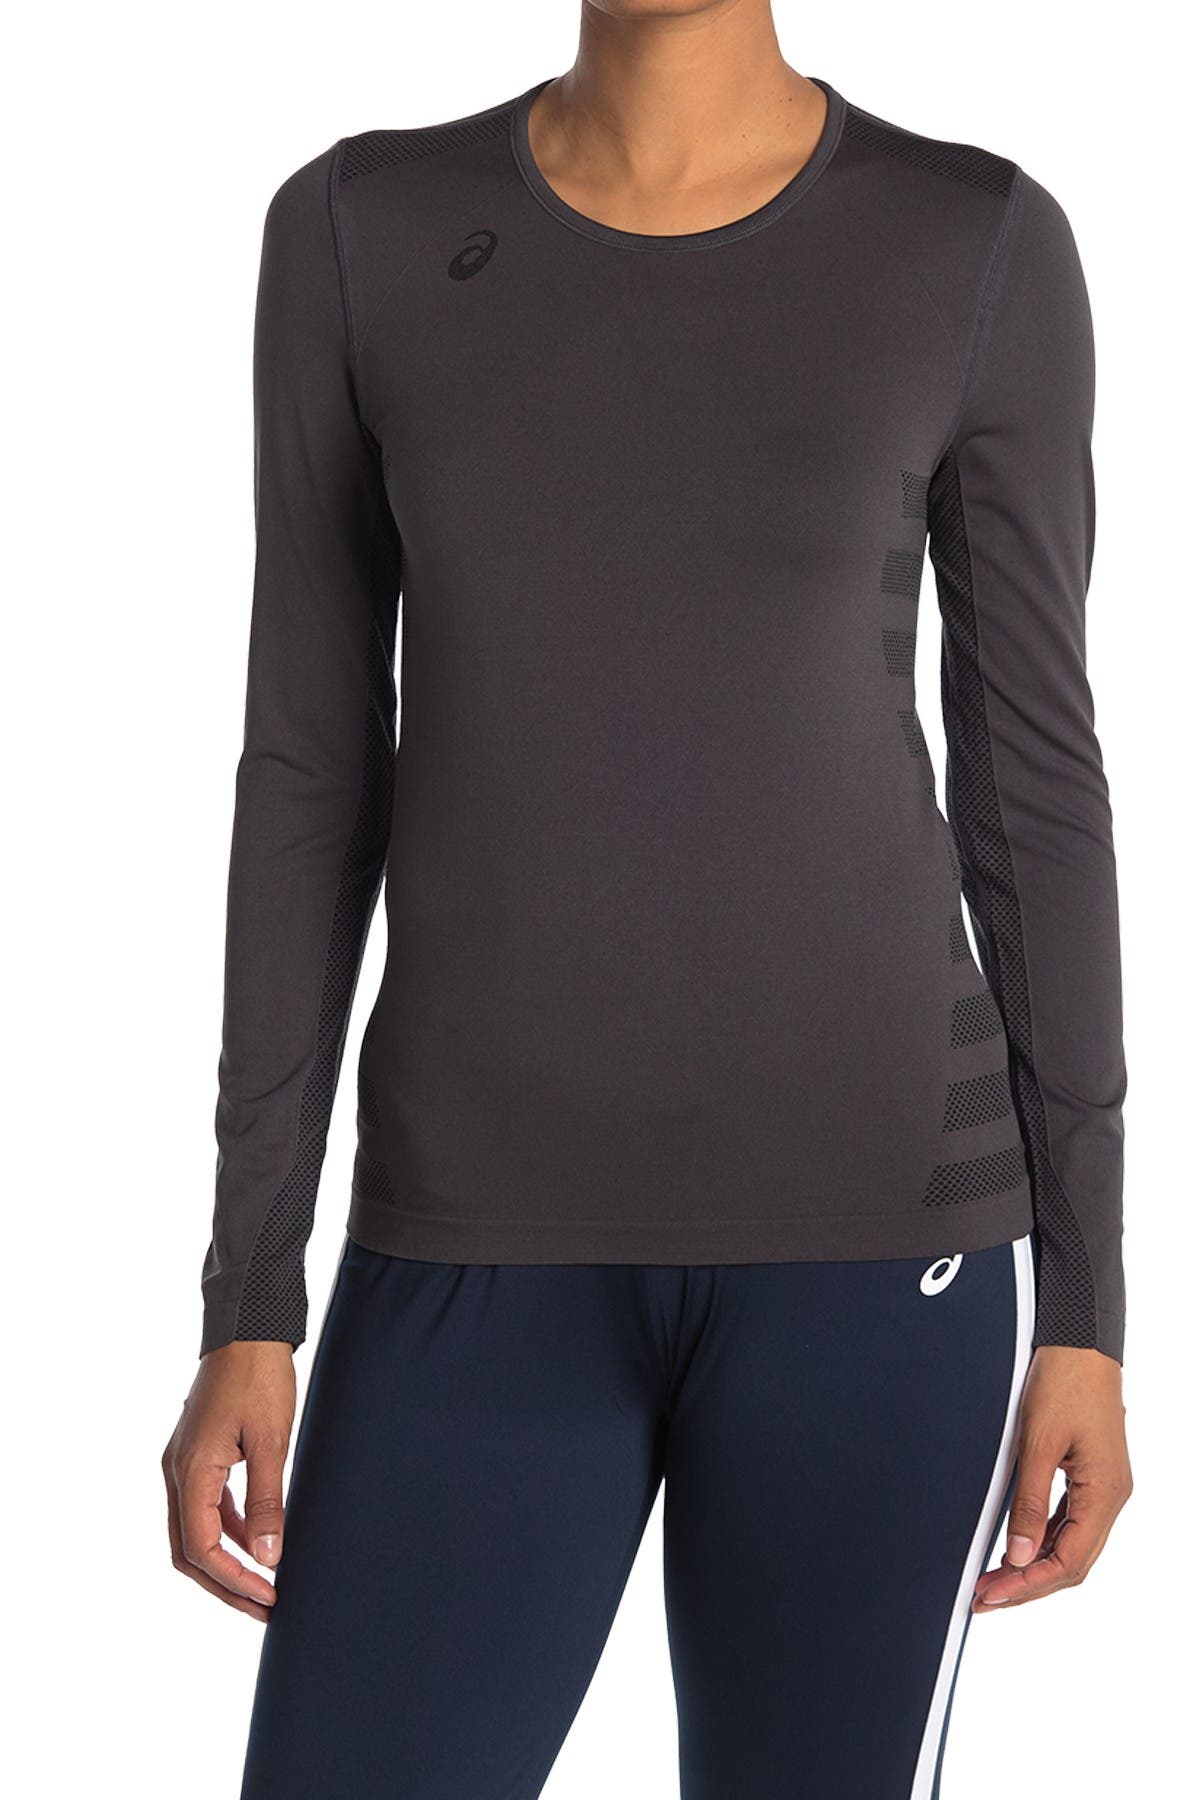 Asics Tactic Court Long Sleeve Jersey In Open Grey34